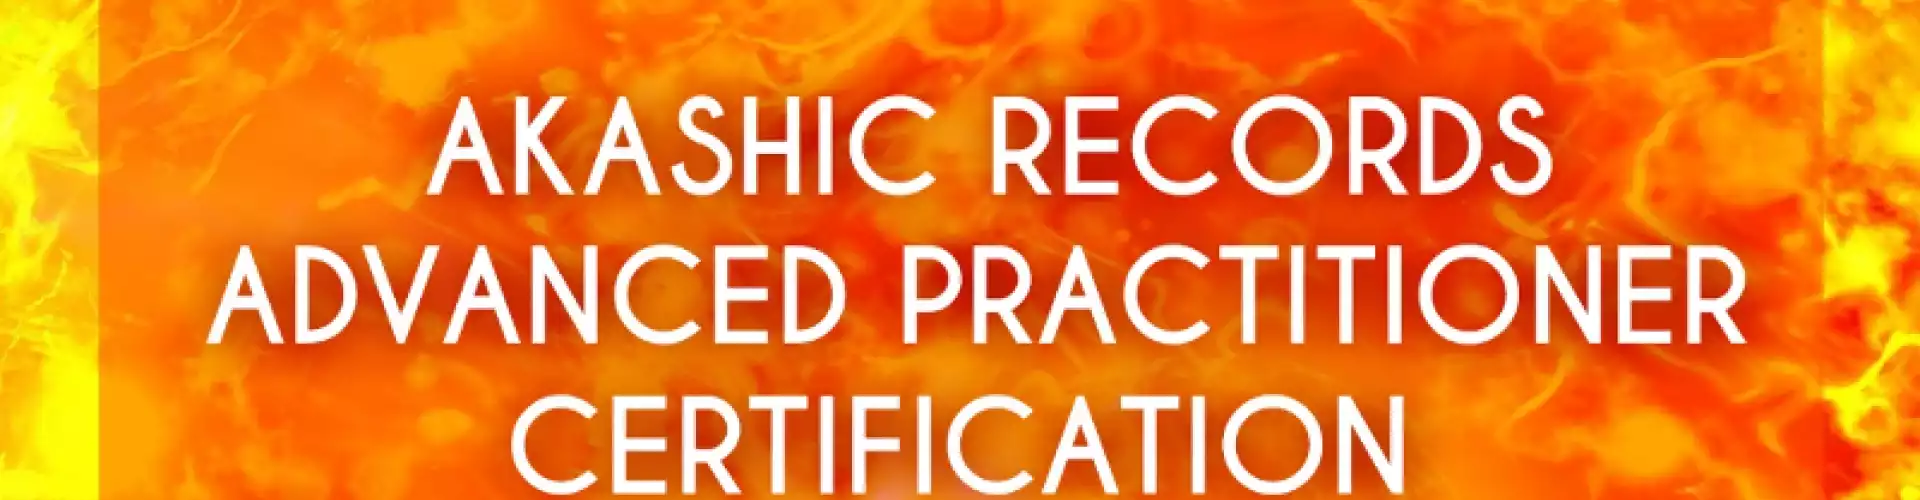 Akashic Records  Advanced Practitioner Certification - March 19-20, 2021 - Amy Mak